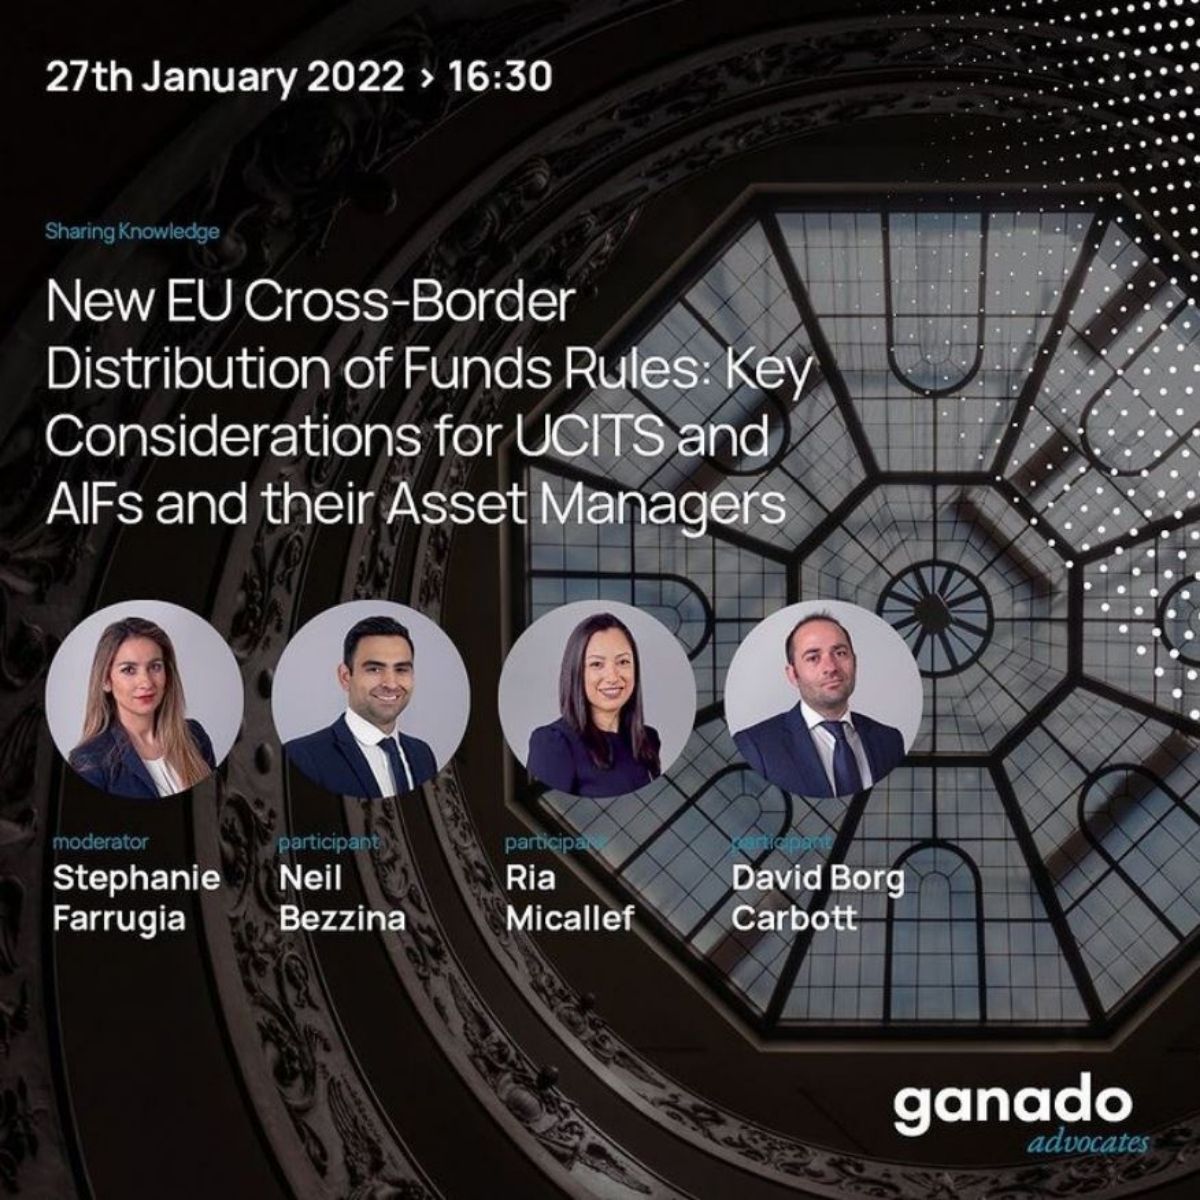 New EU Cross-Border Distribution of Funds Rules: Key Considerations for UCITS and AIFs and their Asset Managers